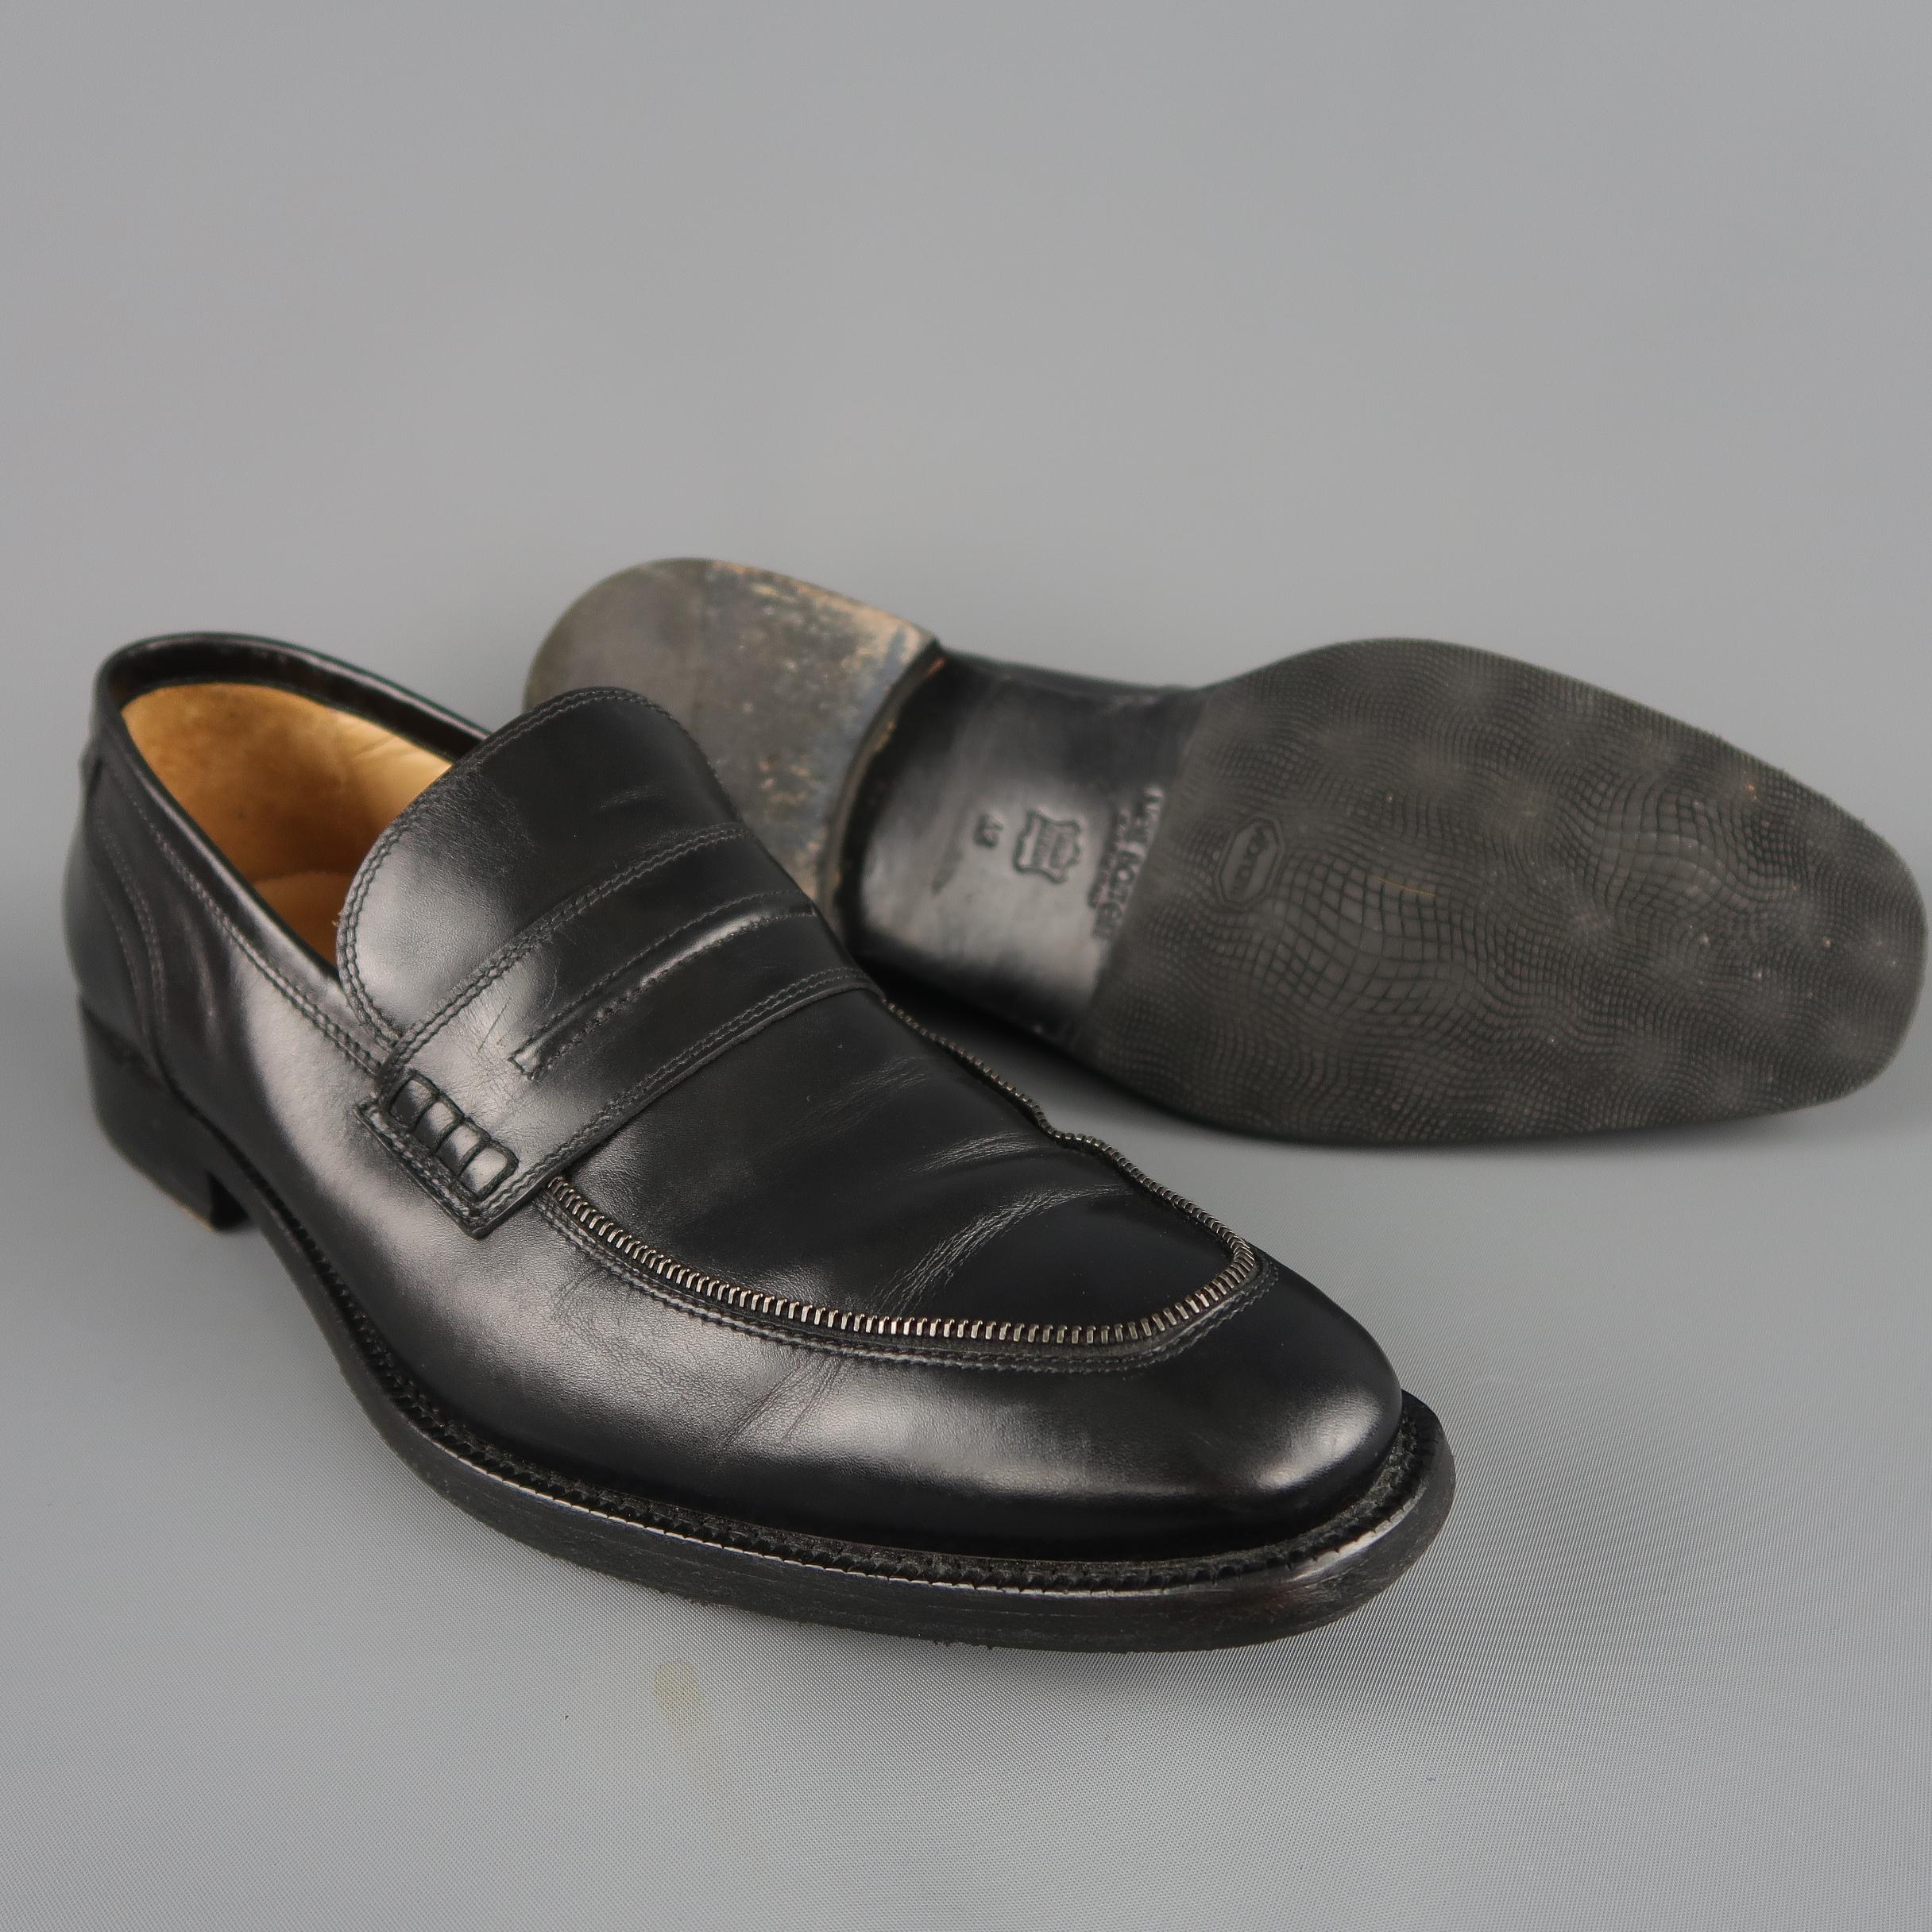 Men's Neil Barrett Loafers - Black Solid Leather Zipper Piping Shoes